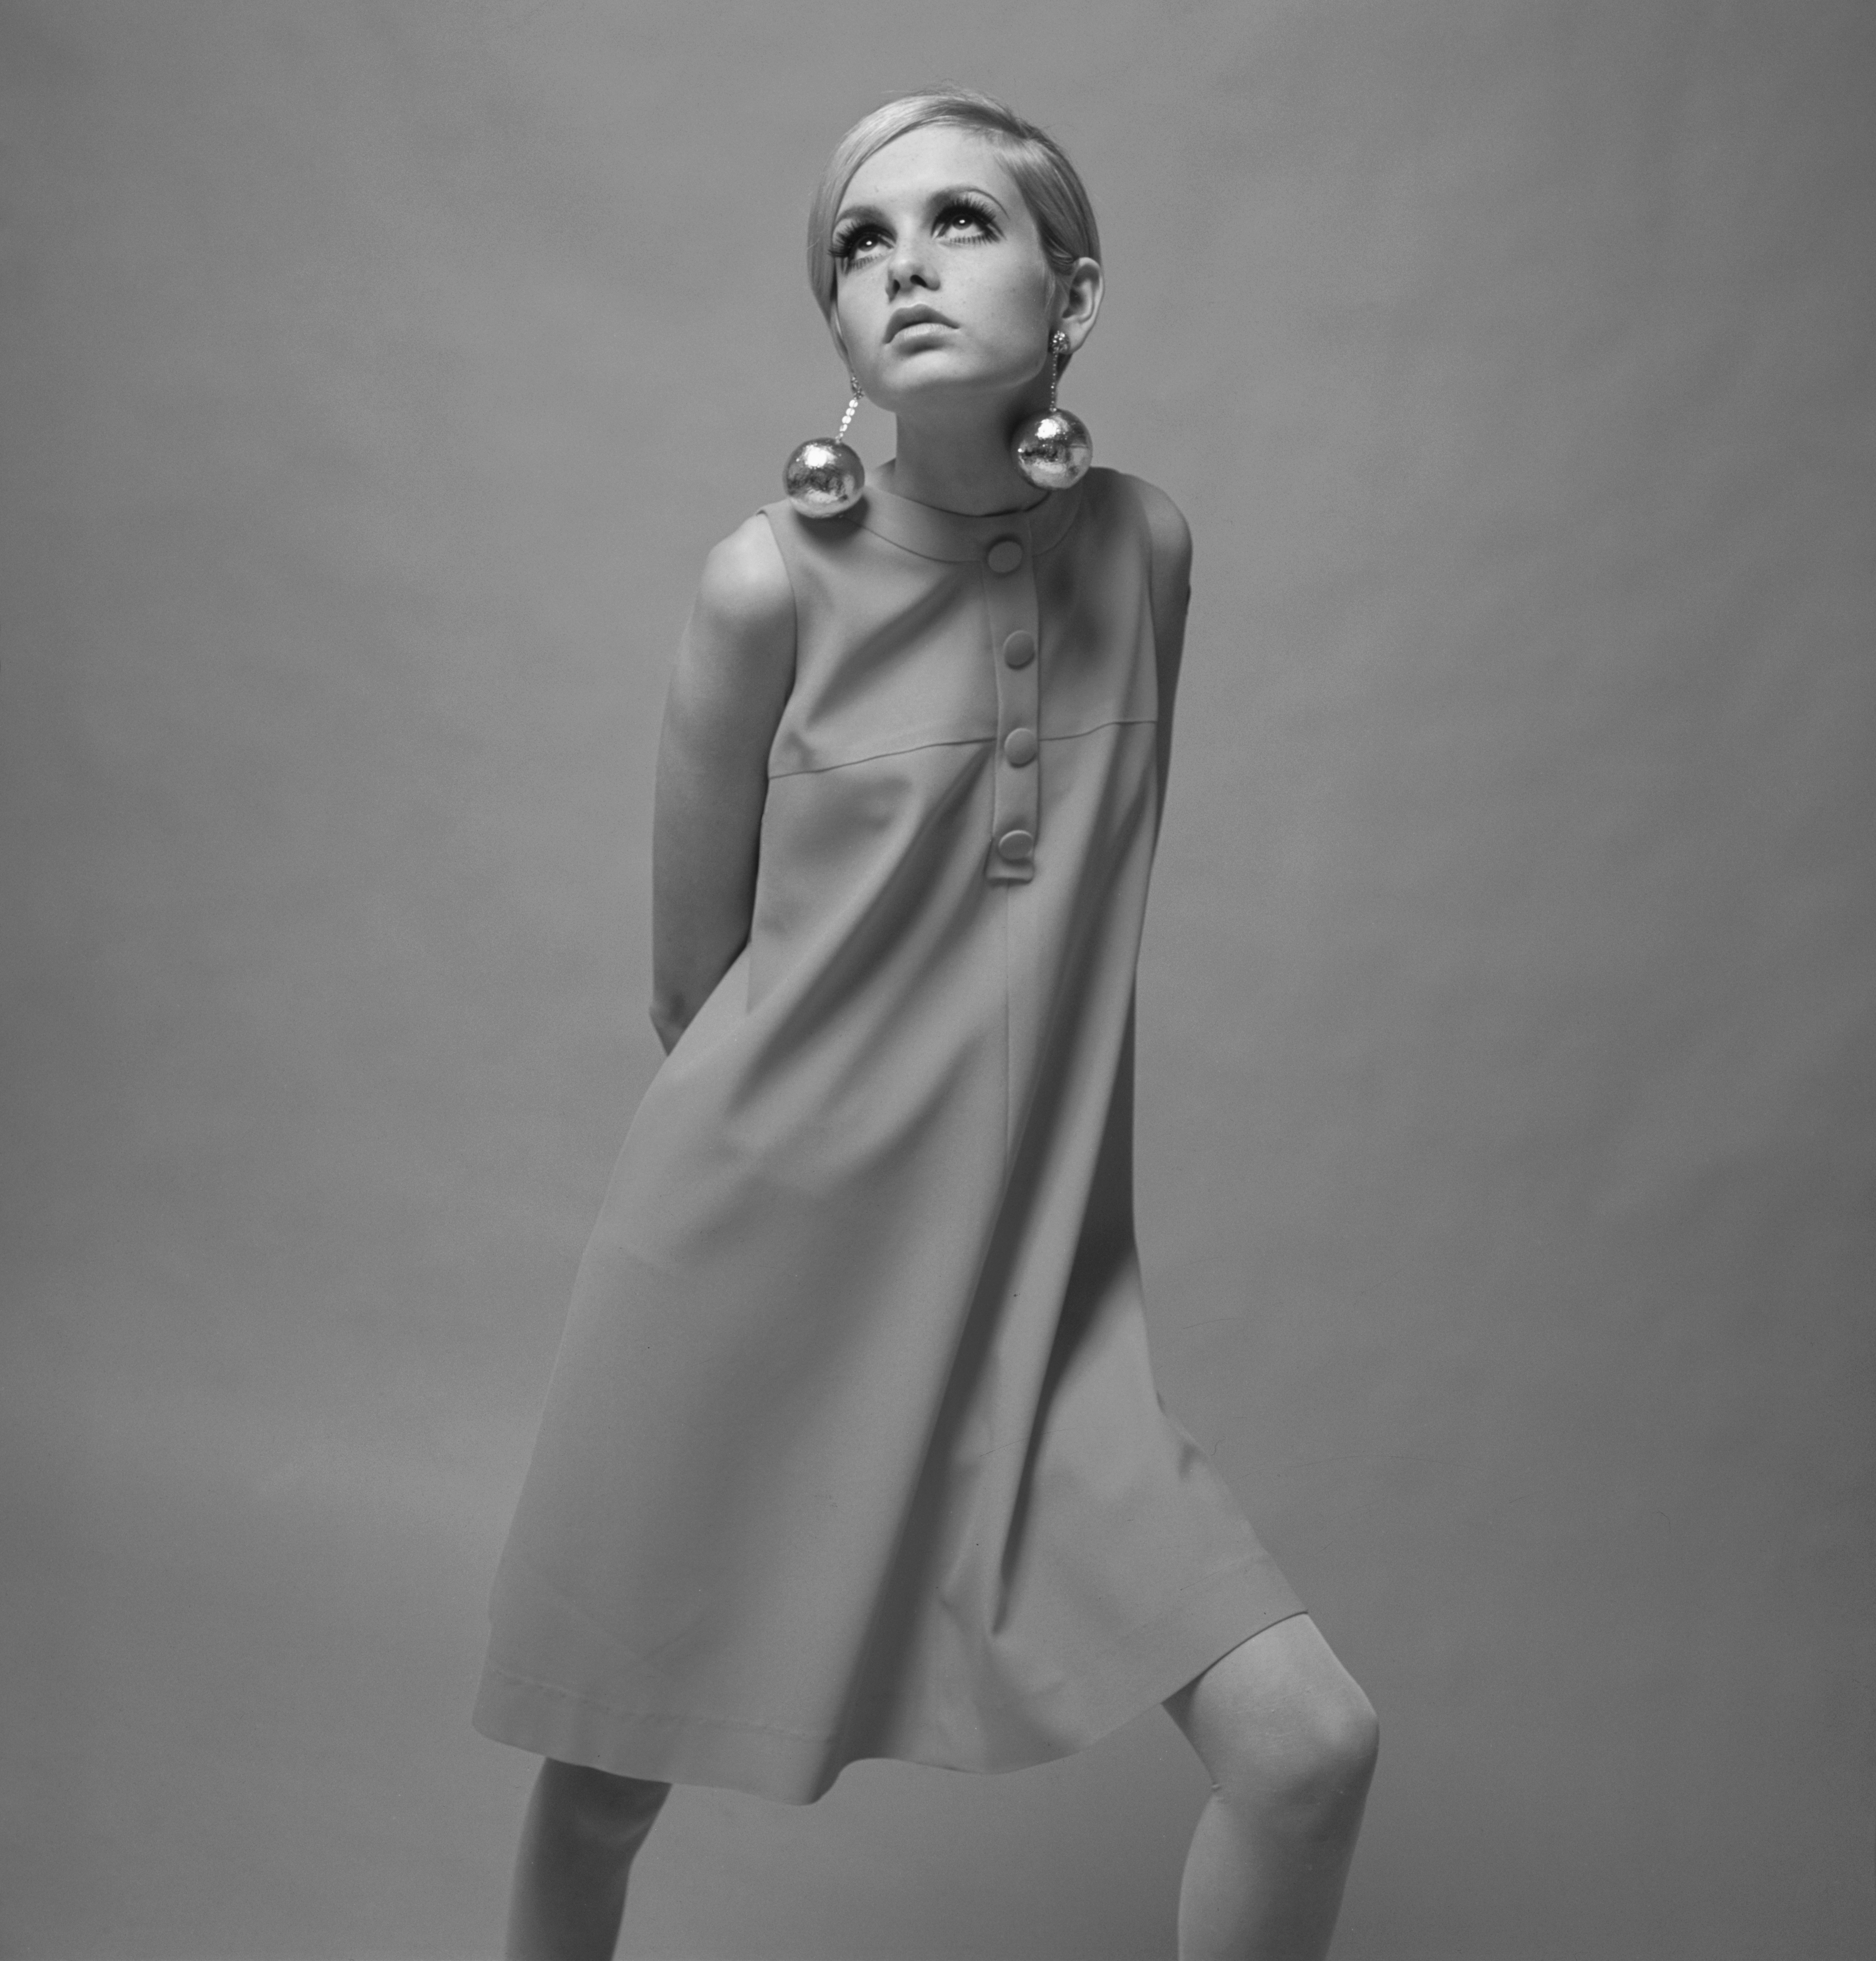 Of twiggy photos 30 Fascinating